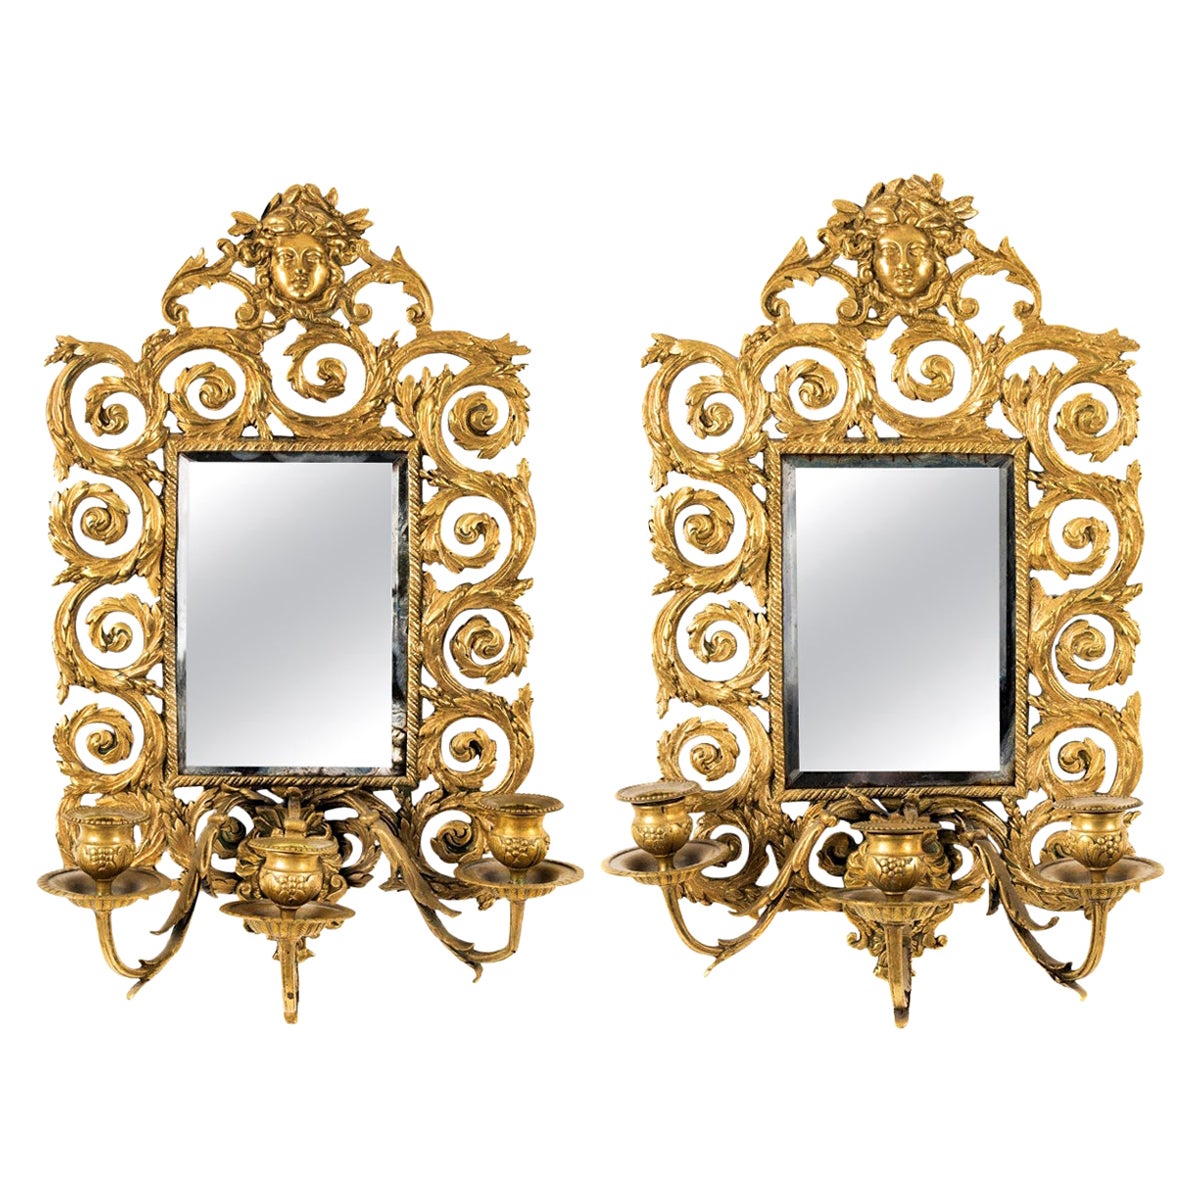 Pair of French Antique Baroque Style Brass Girandole Wall Mirrors, 19th Century For Sale